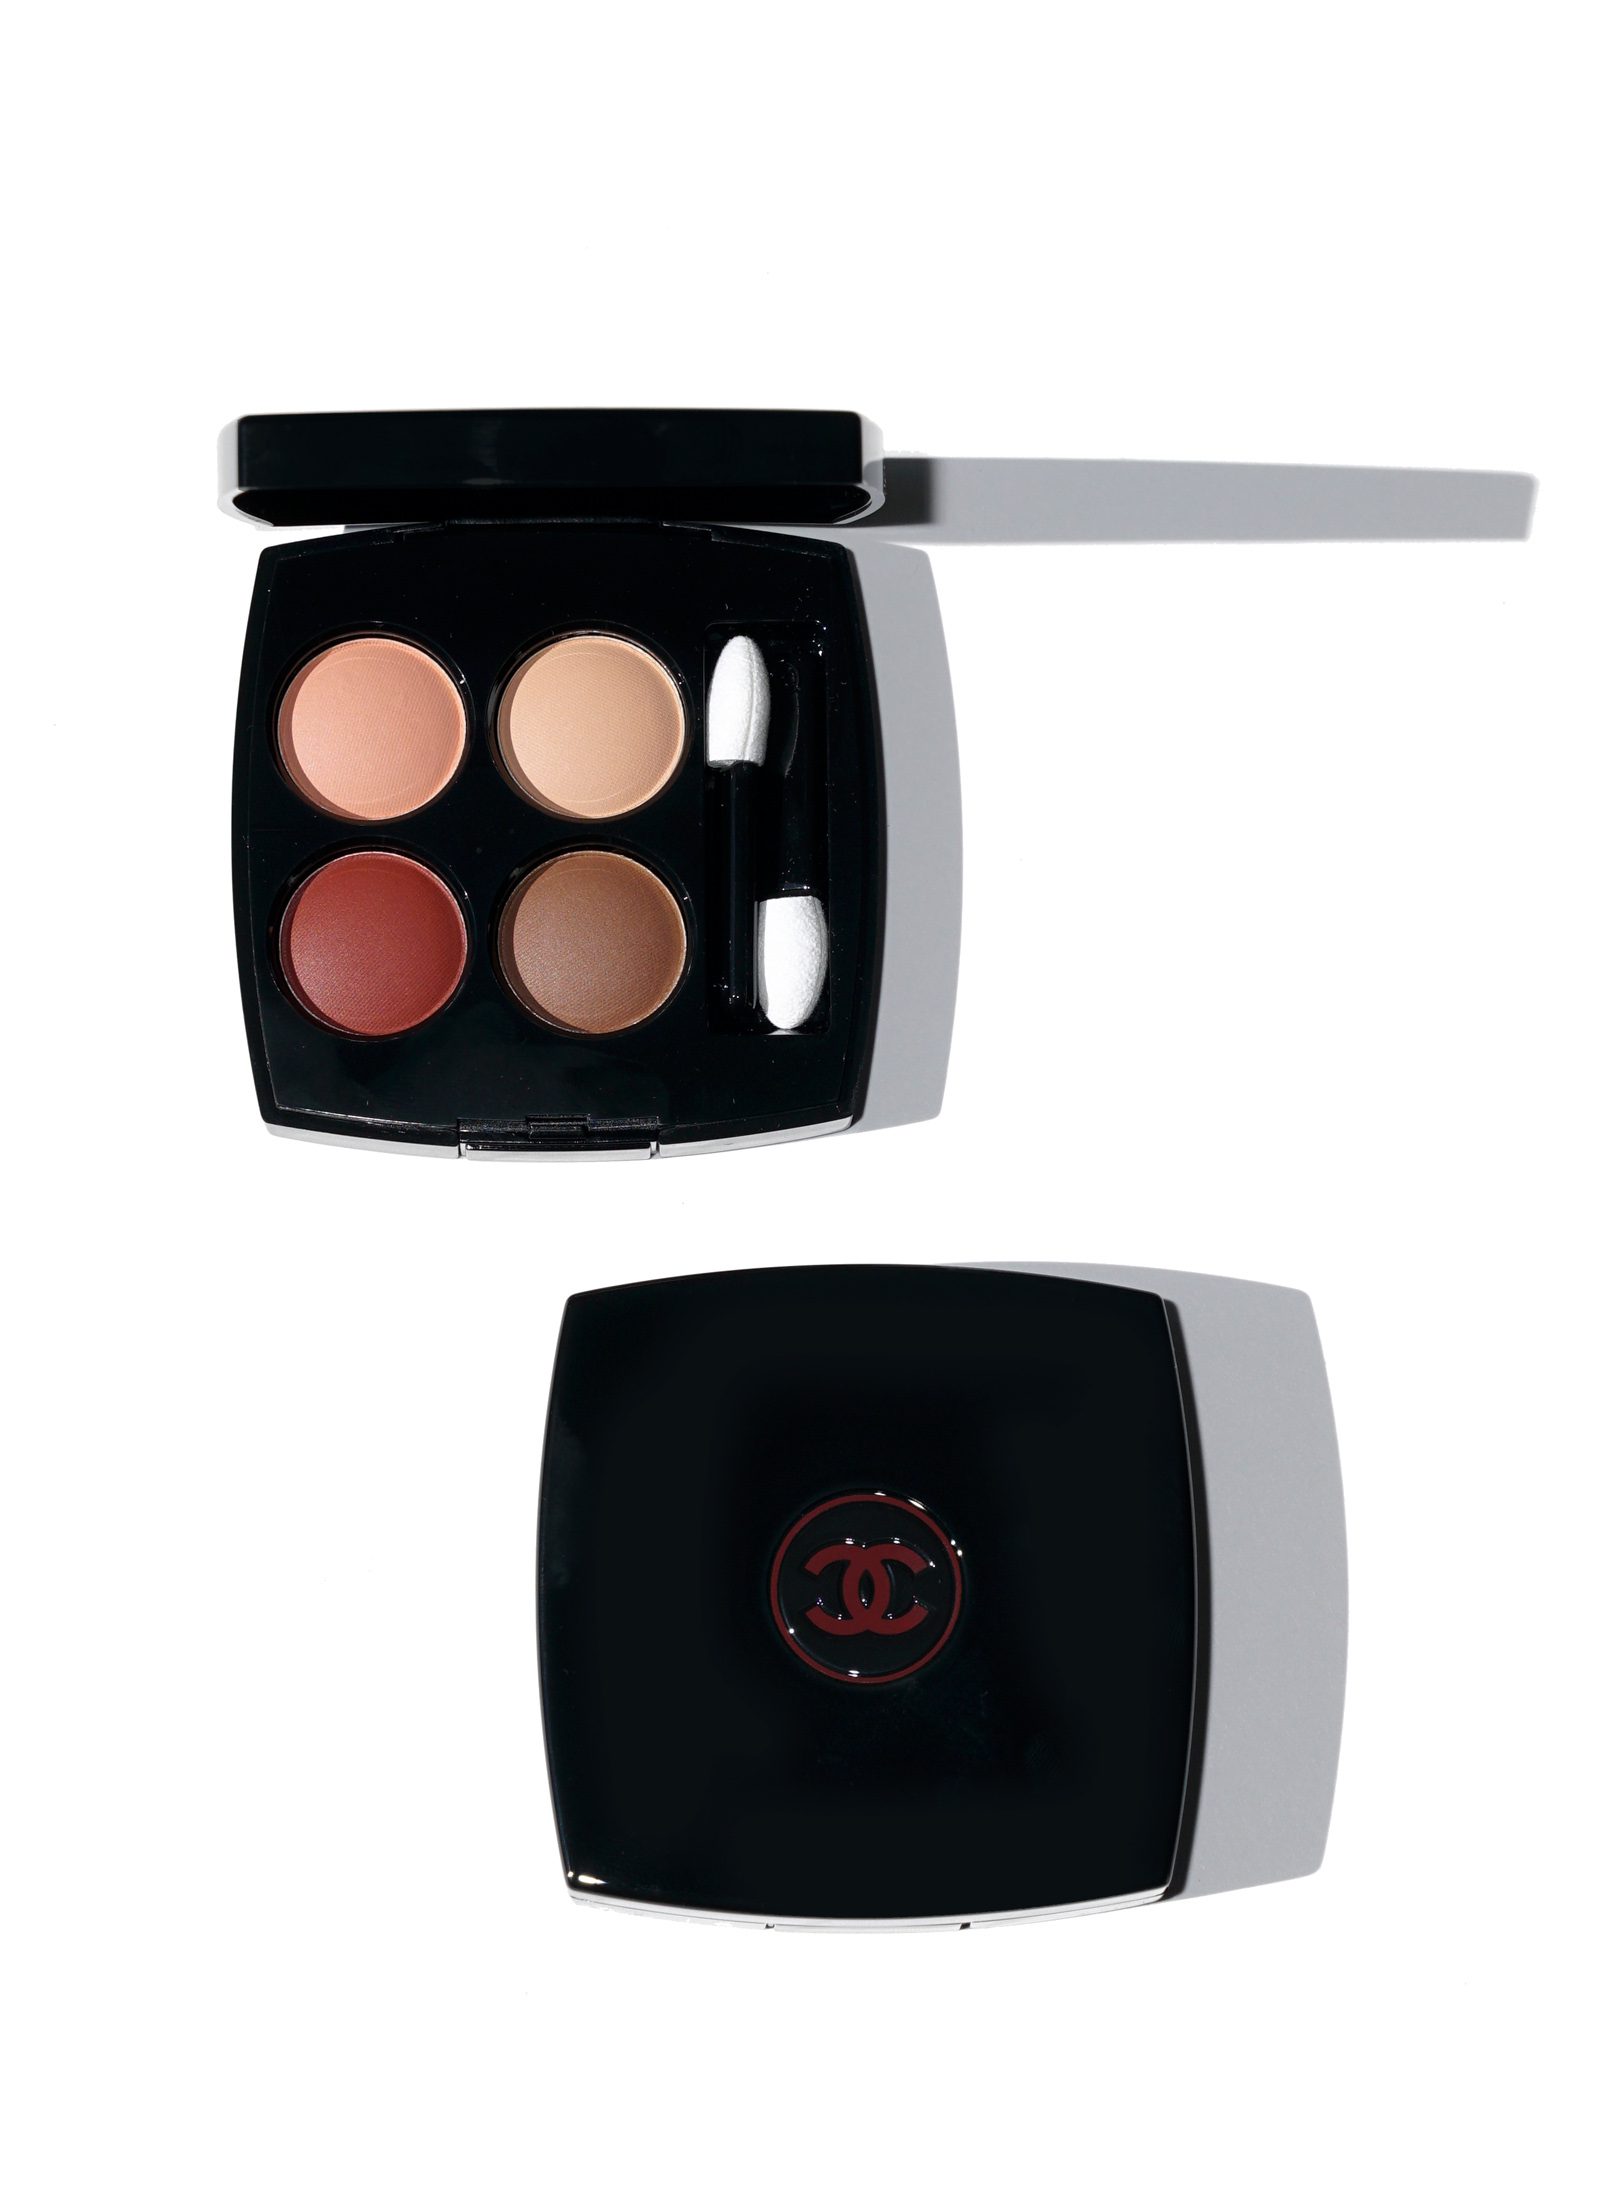 Chanel Black Friday Exclusive: Legerete et Experience - The Beauty Look Book